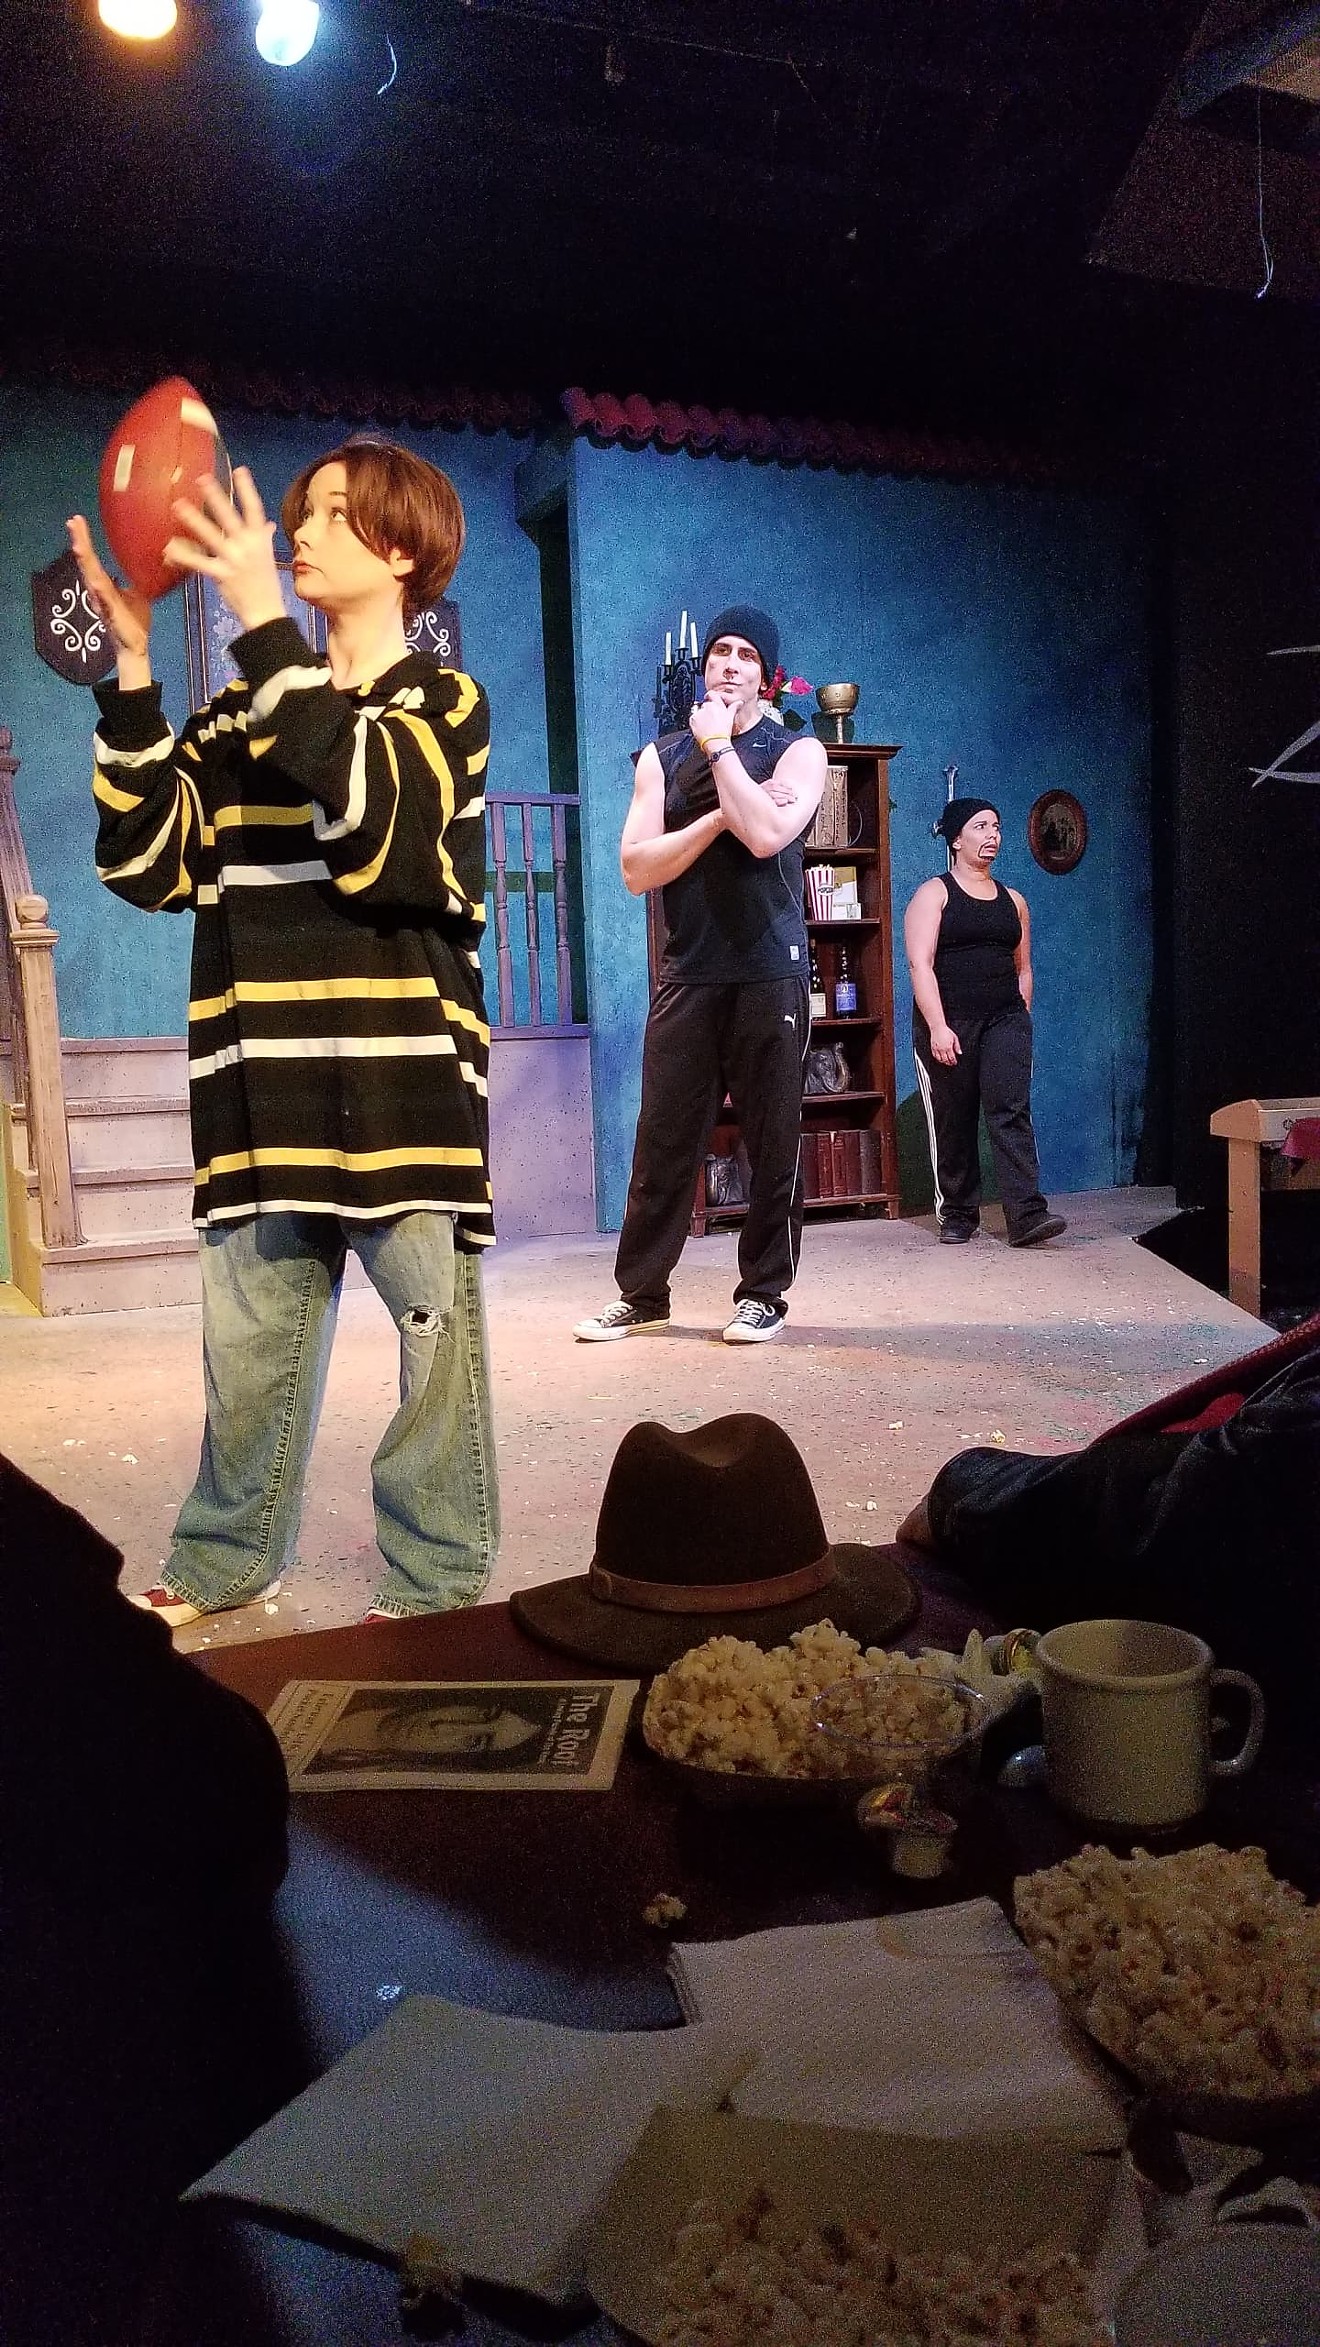 Dan Janjigian (middle) reprises his famous role from Tommy Wiseau's The Room as the tough drug dealer Chris R. in the middle of a scene at Pocket Sandwich Theatre's parody The Roof between Rhonda Durant (left) and Janjigian's Roof counterpart "Kurt R," played by Melissa Torres (right).